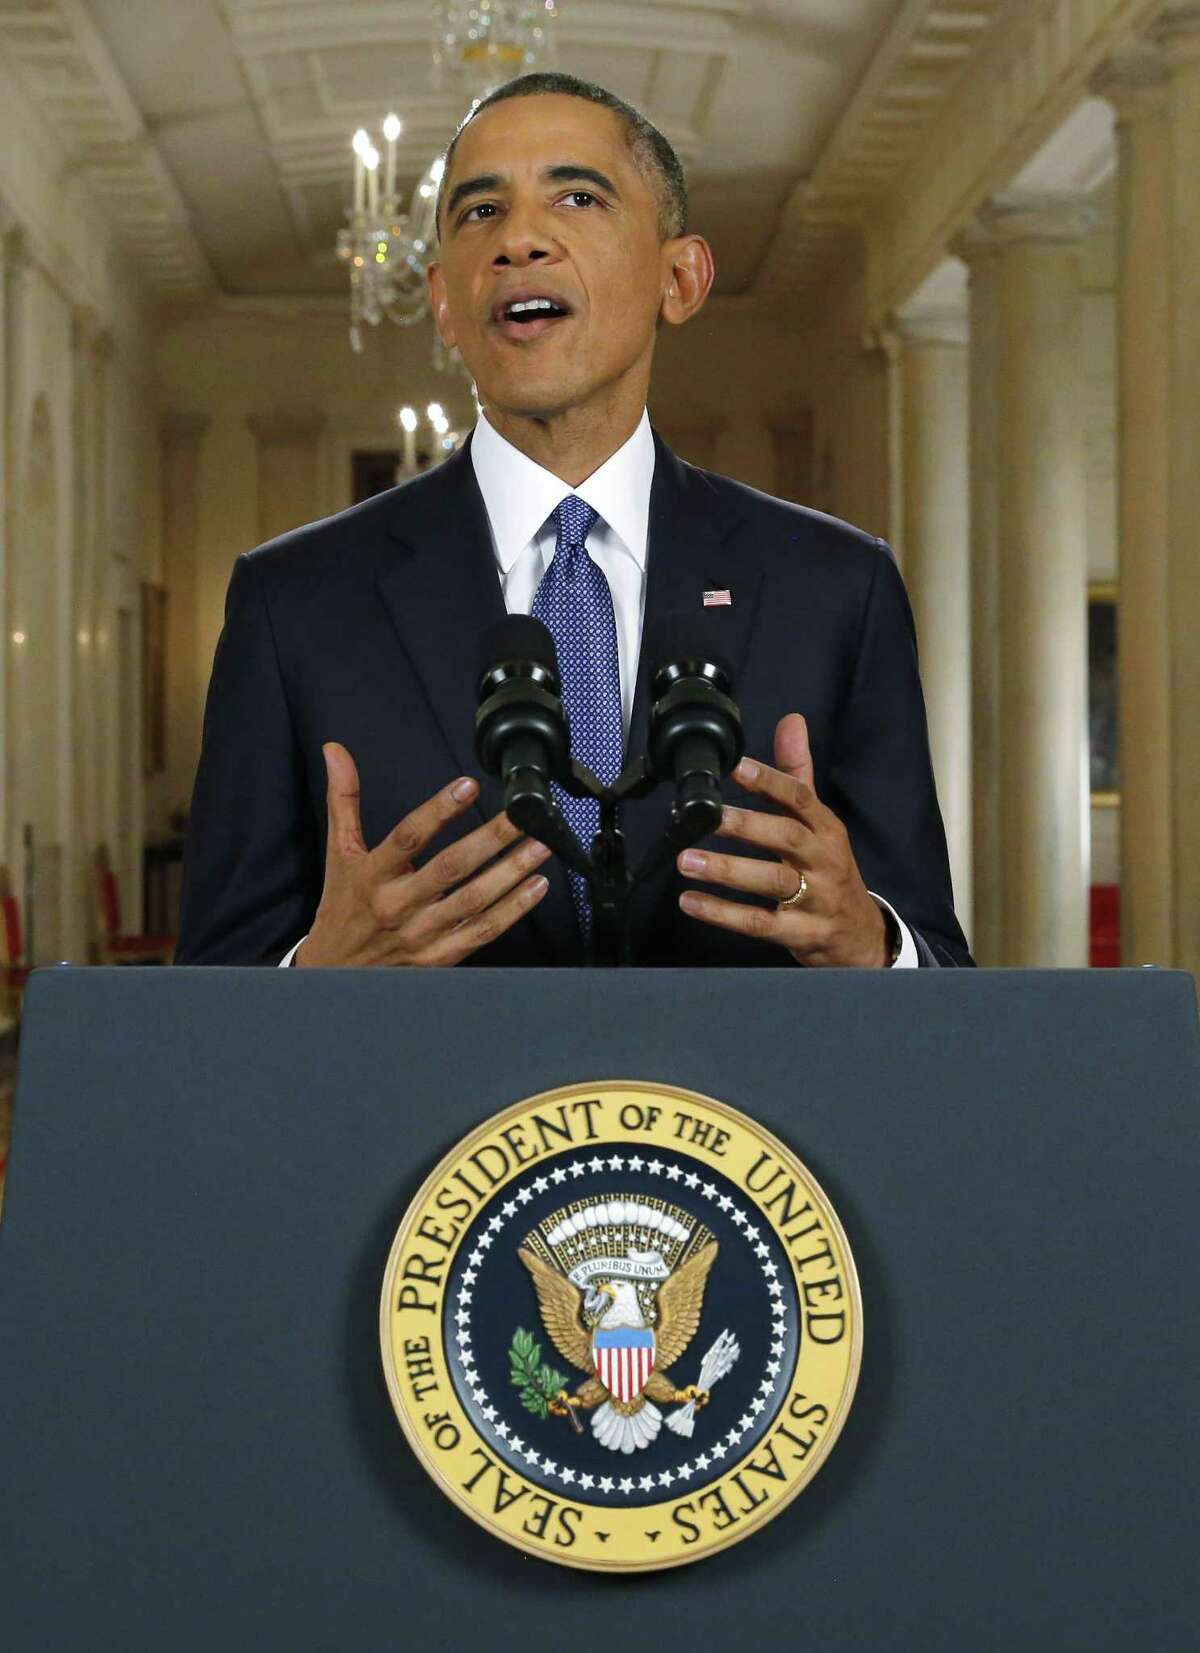 President Barack Obama announces executive actions on immigration during a nationally televised address from the White House in Washington, Thursday, Nov. 20, 2014. Obama outlined a plan on Thursday to relax U.S. immigration policy, affecting as many as 5 million people.